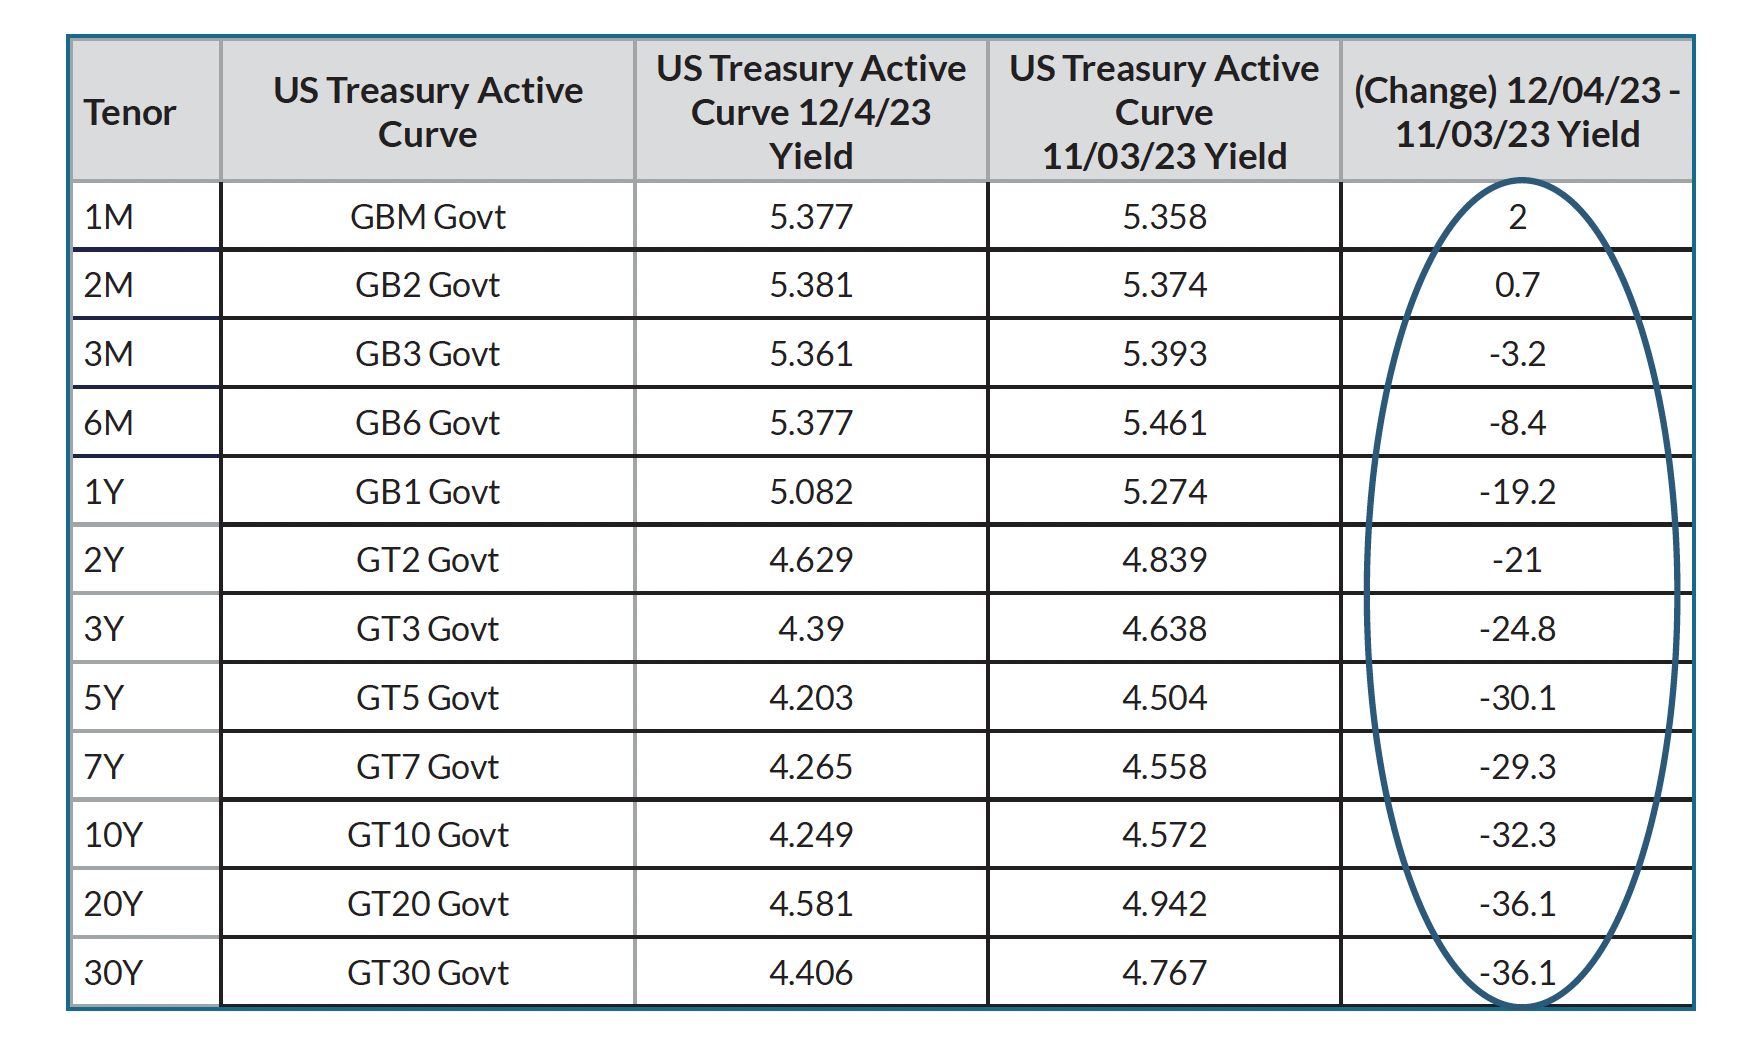 Chart comparing US treasury active yields